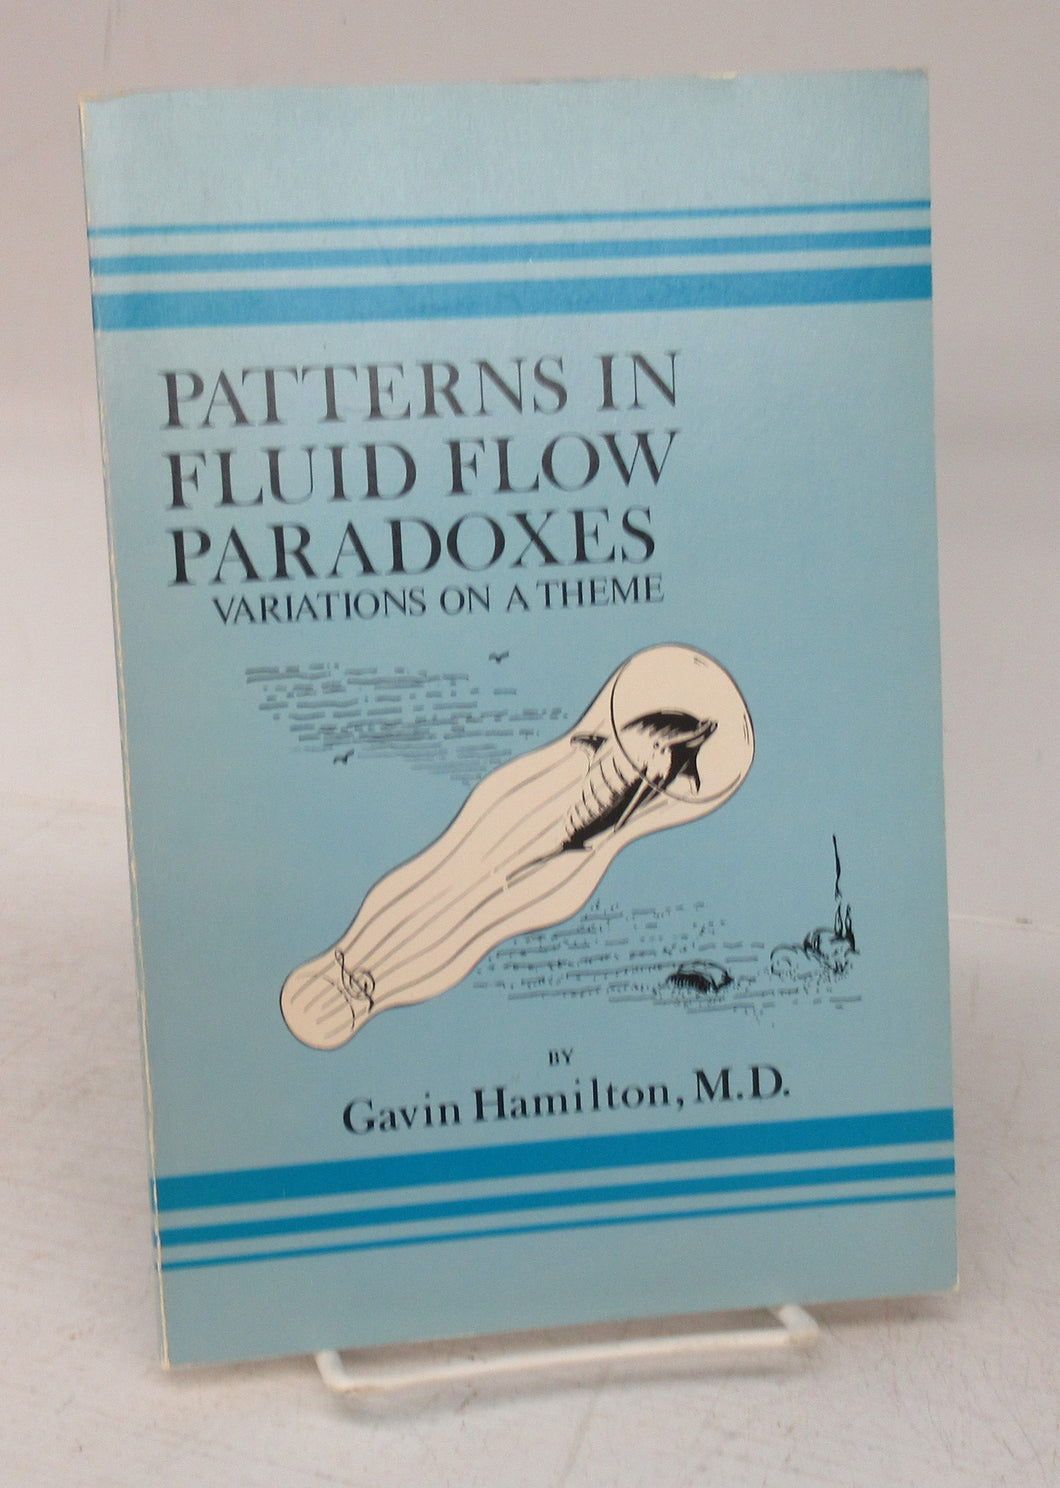 Patterns in Fluid Flow Paradoxes: Variations on a Theme